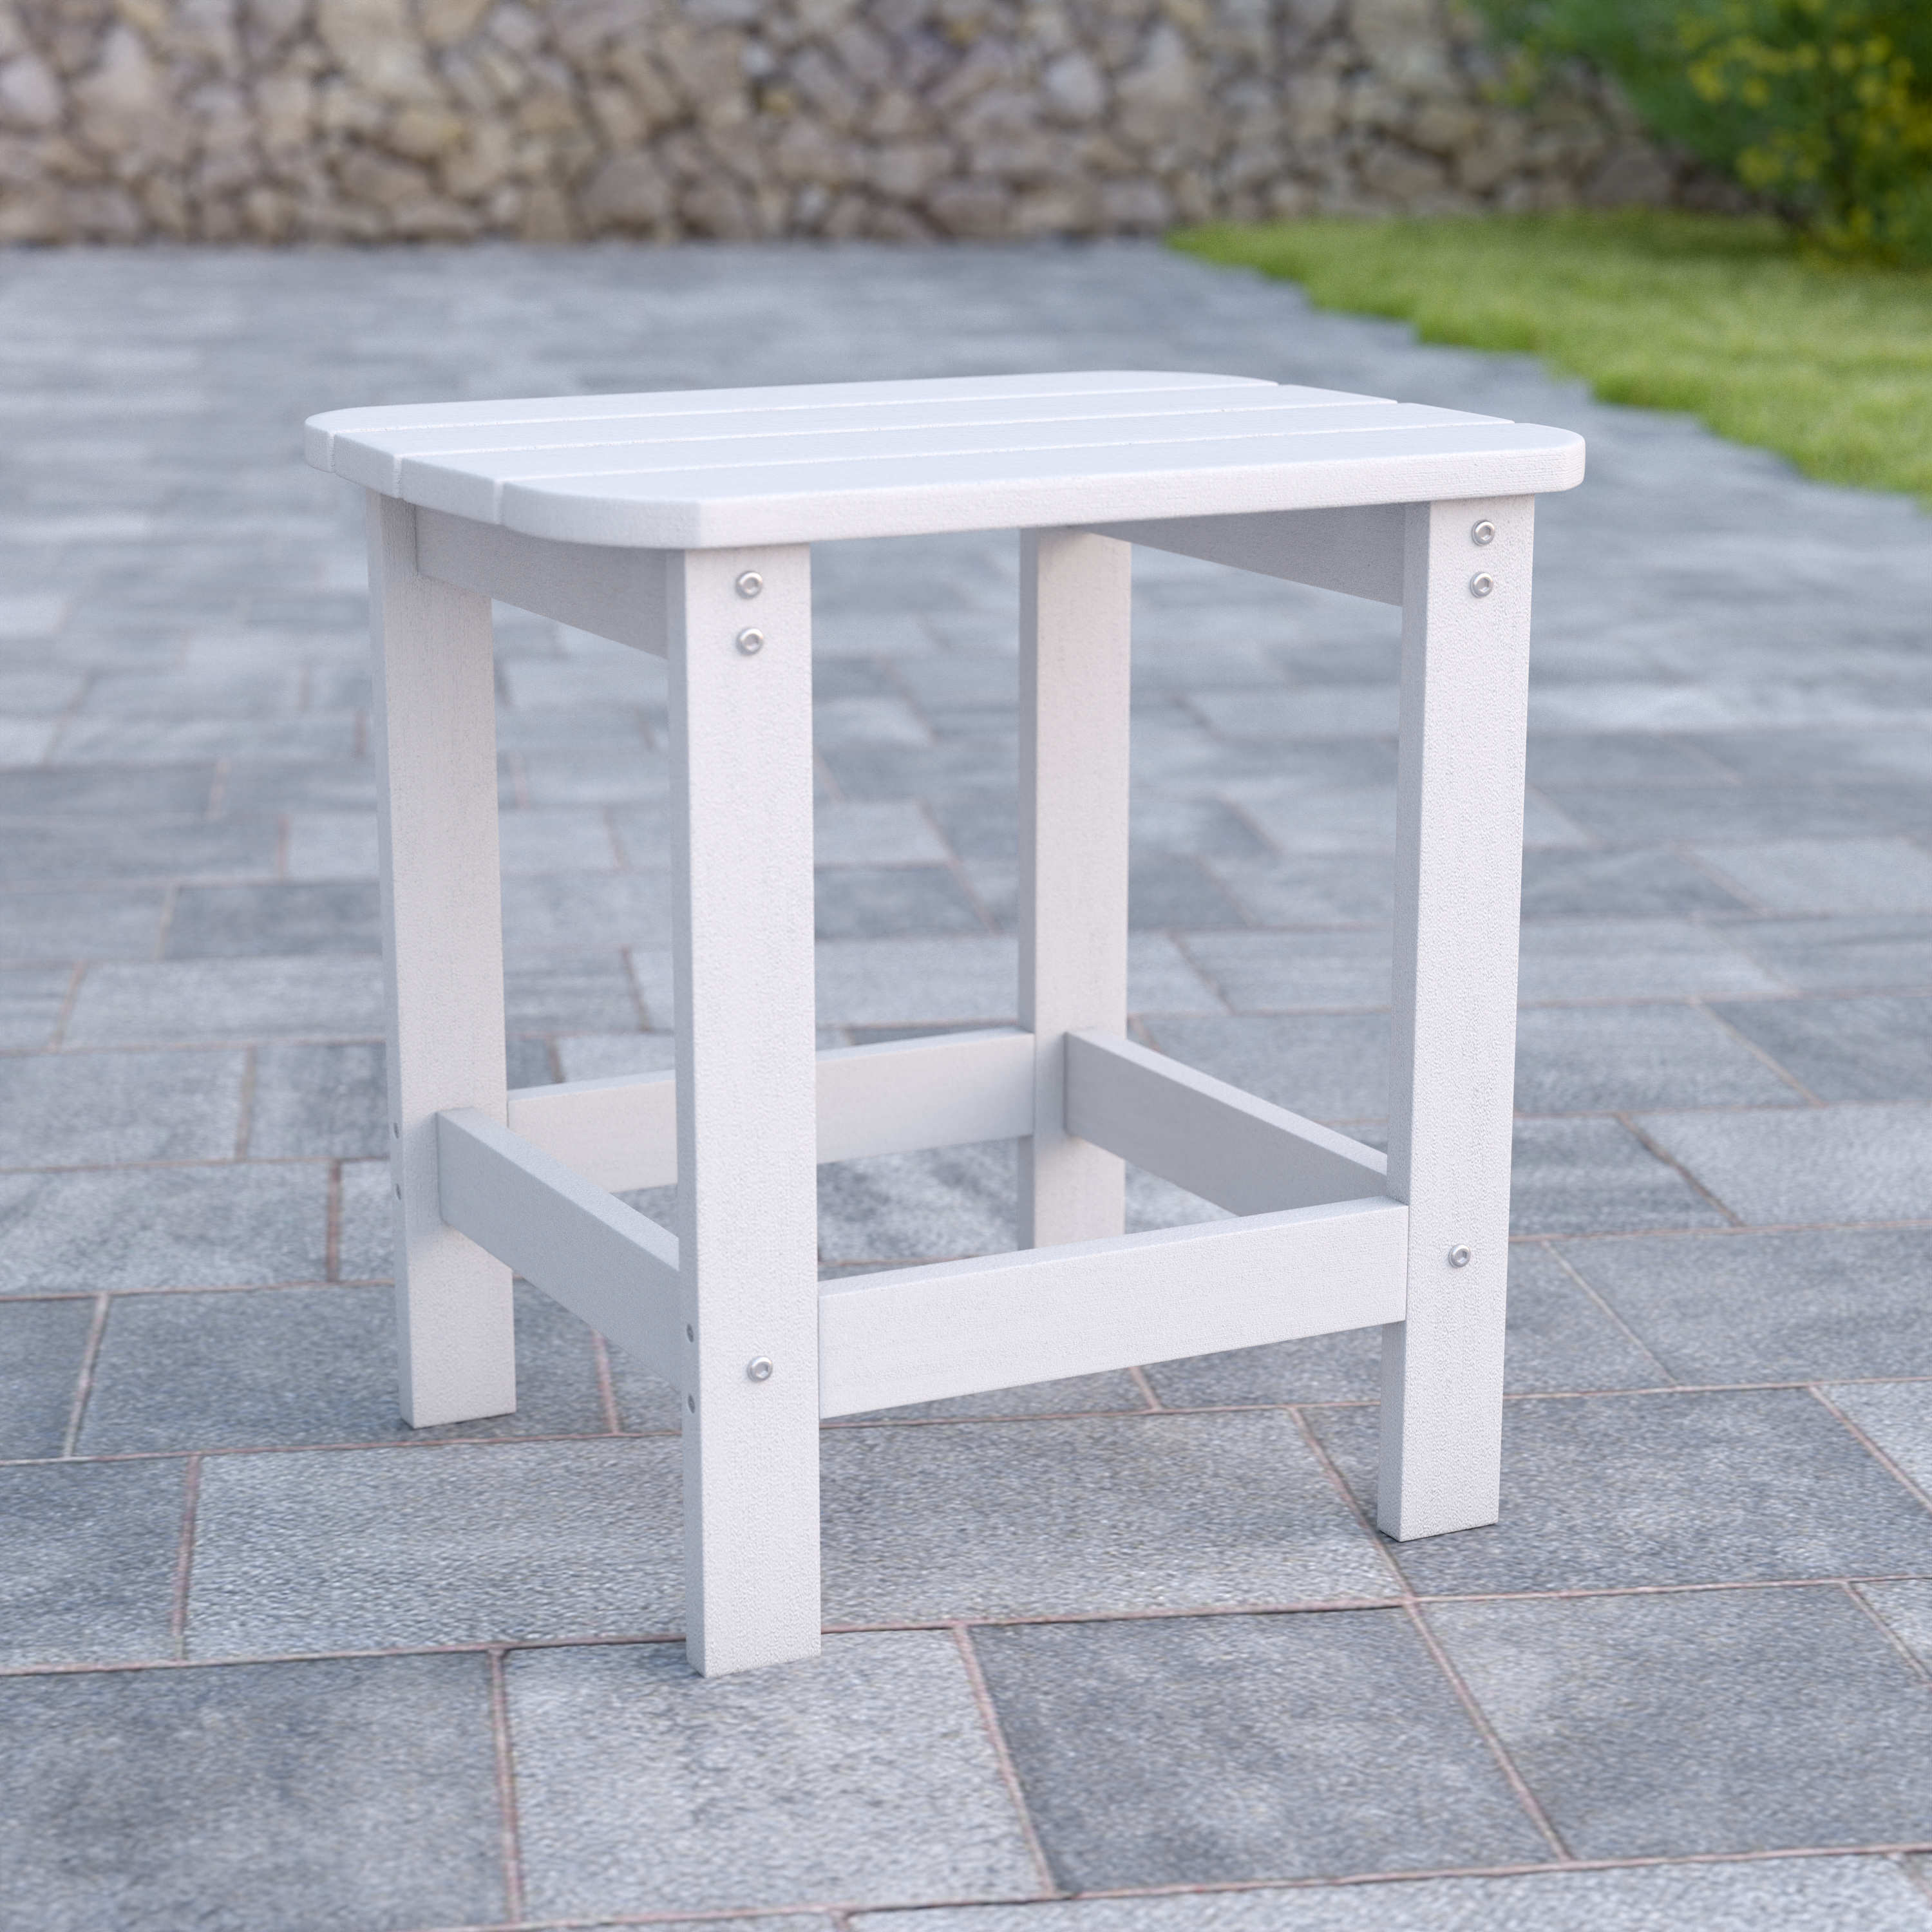 Emma + Oliver Indoor/Outdoor Polyresin Adirondack Side Table for Porch, Patio, or Sunroom in White - image 1 of 9